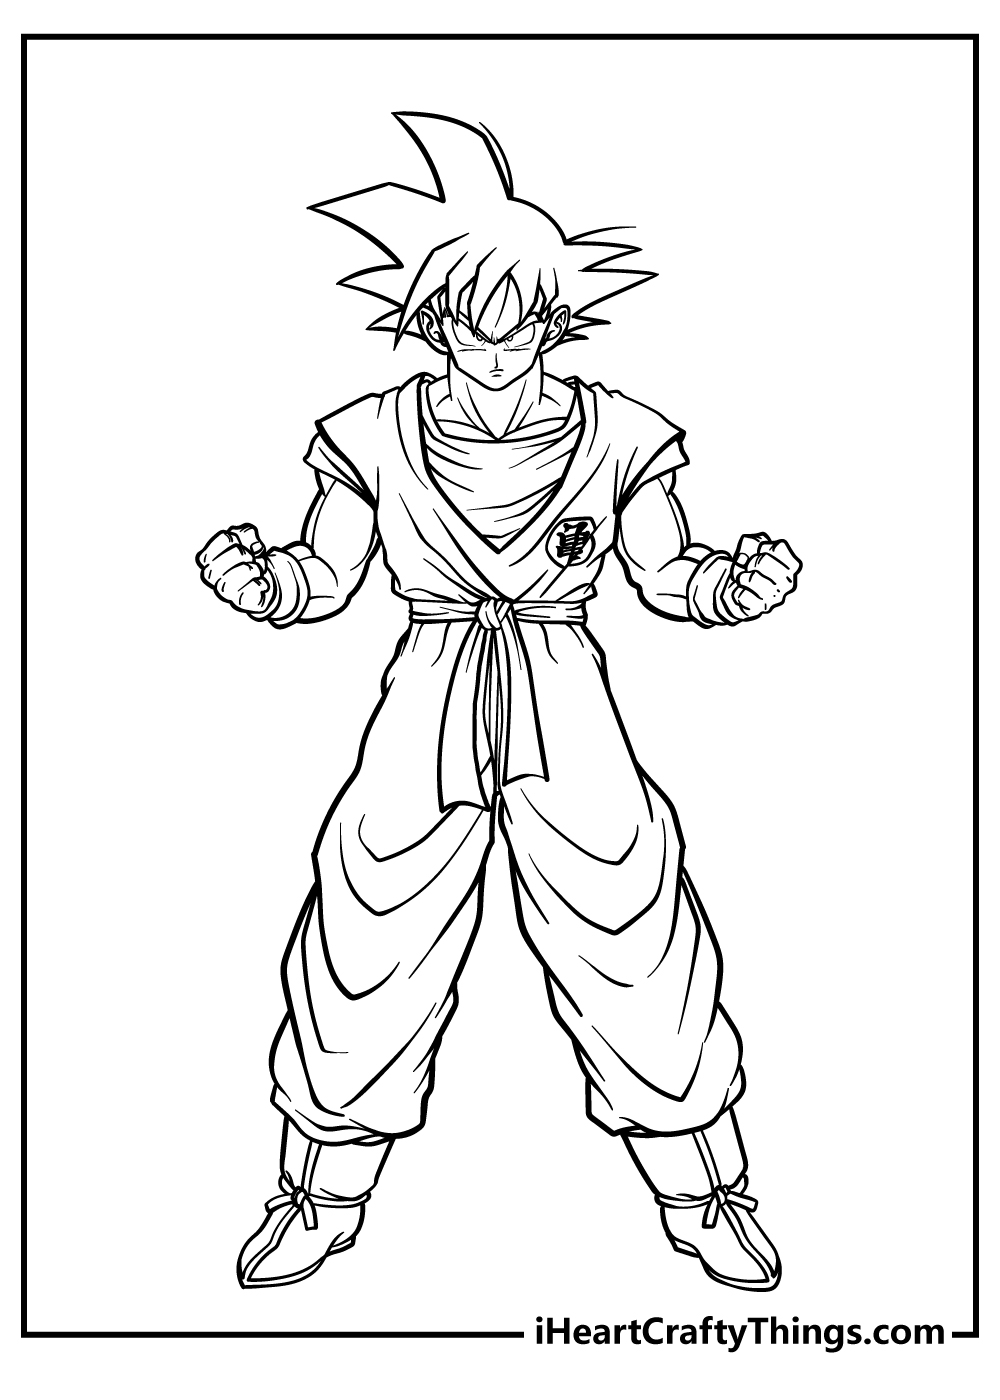 adult male Anime Coloring Pages free download